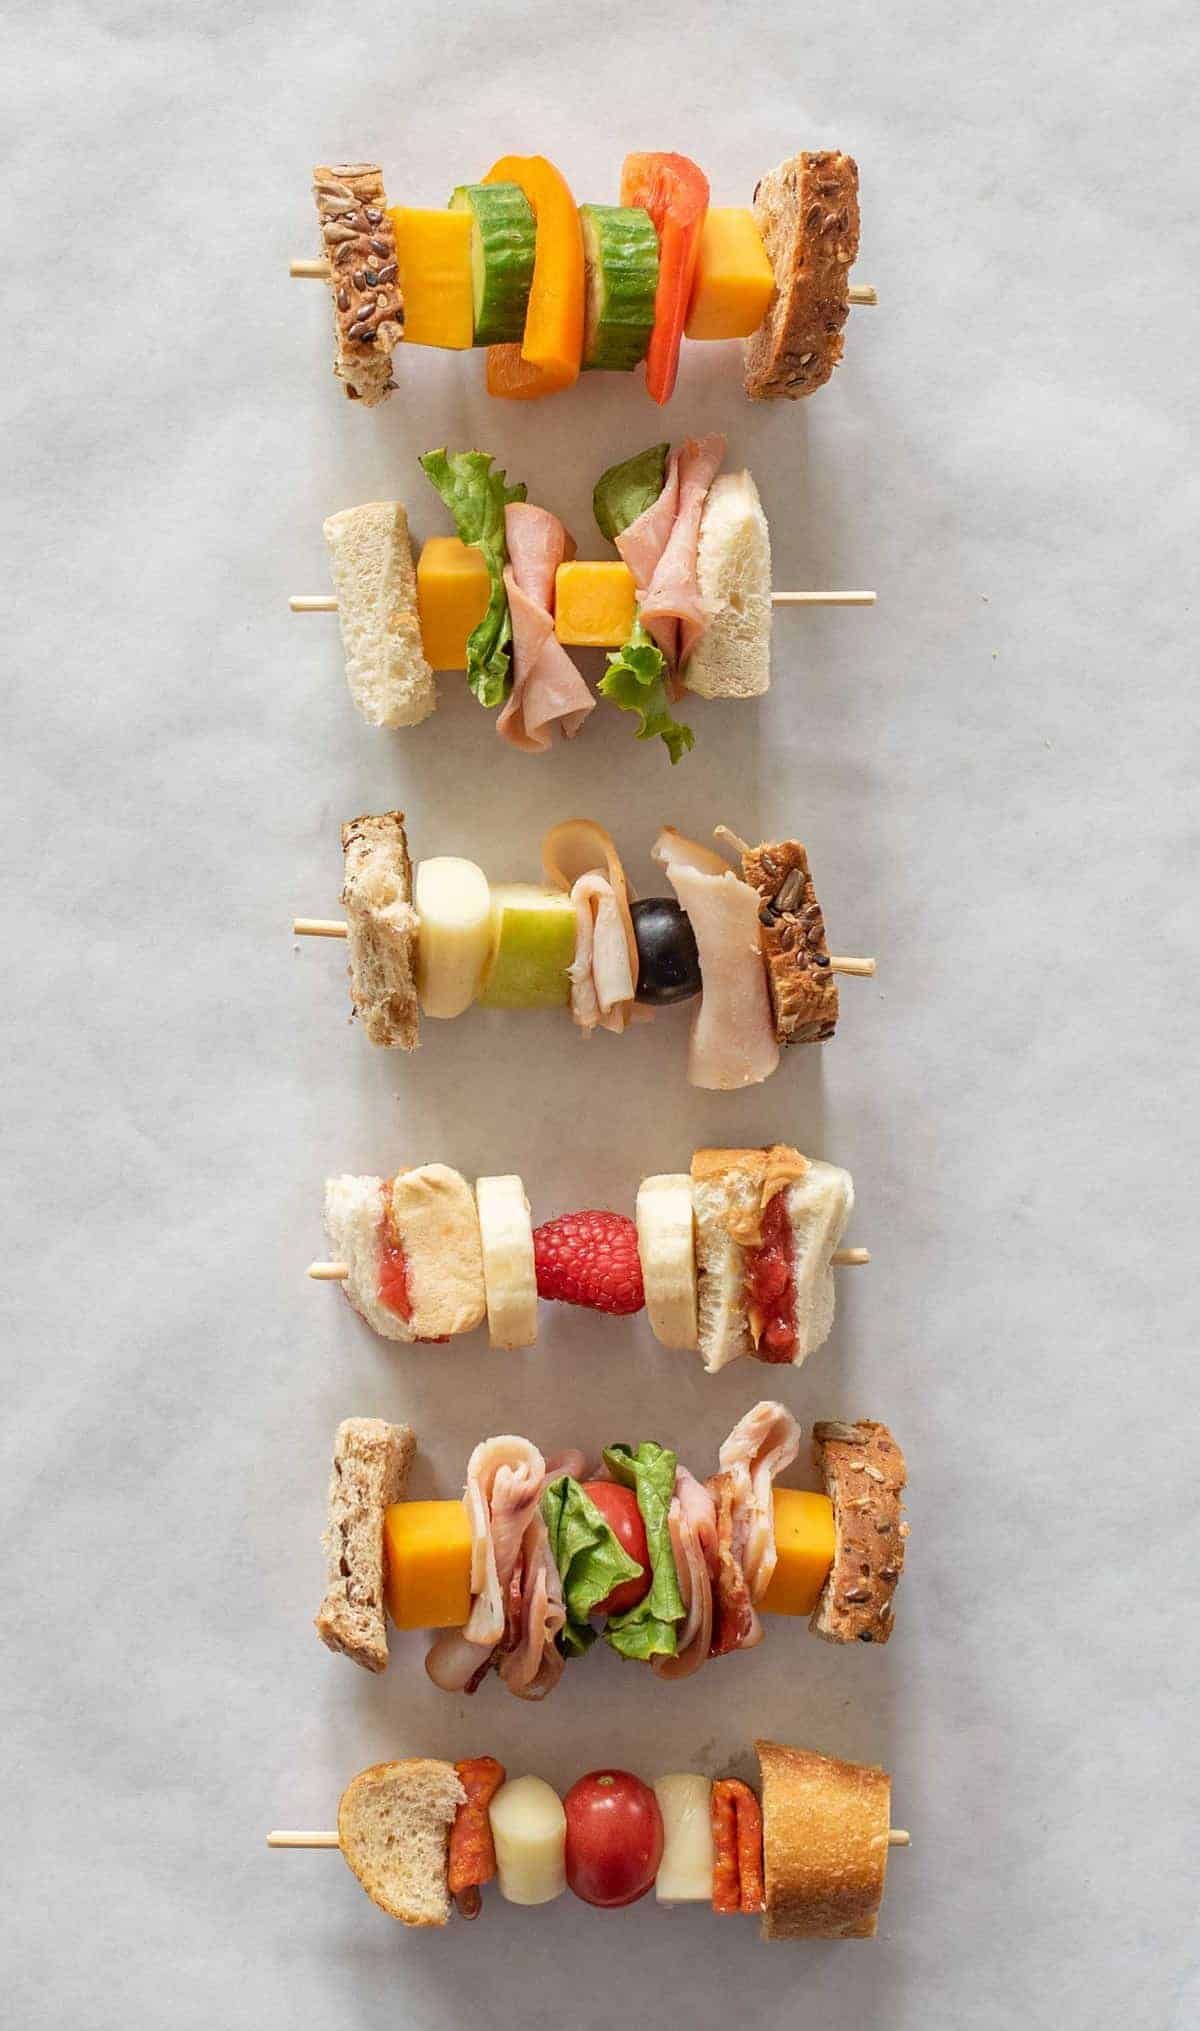 6 skewers are filled with diffferent sandwich combinations